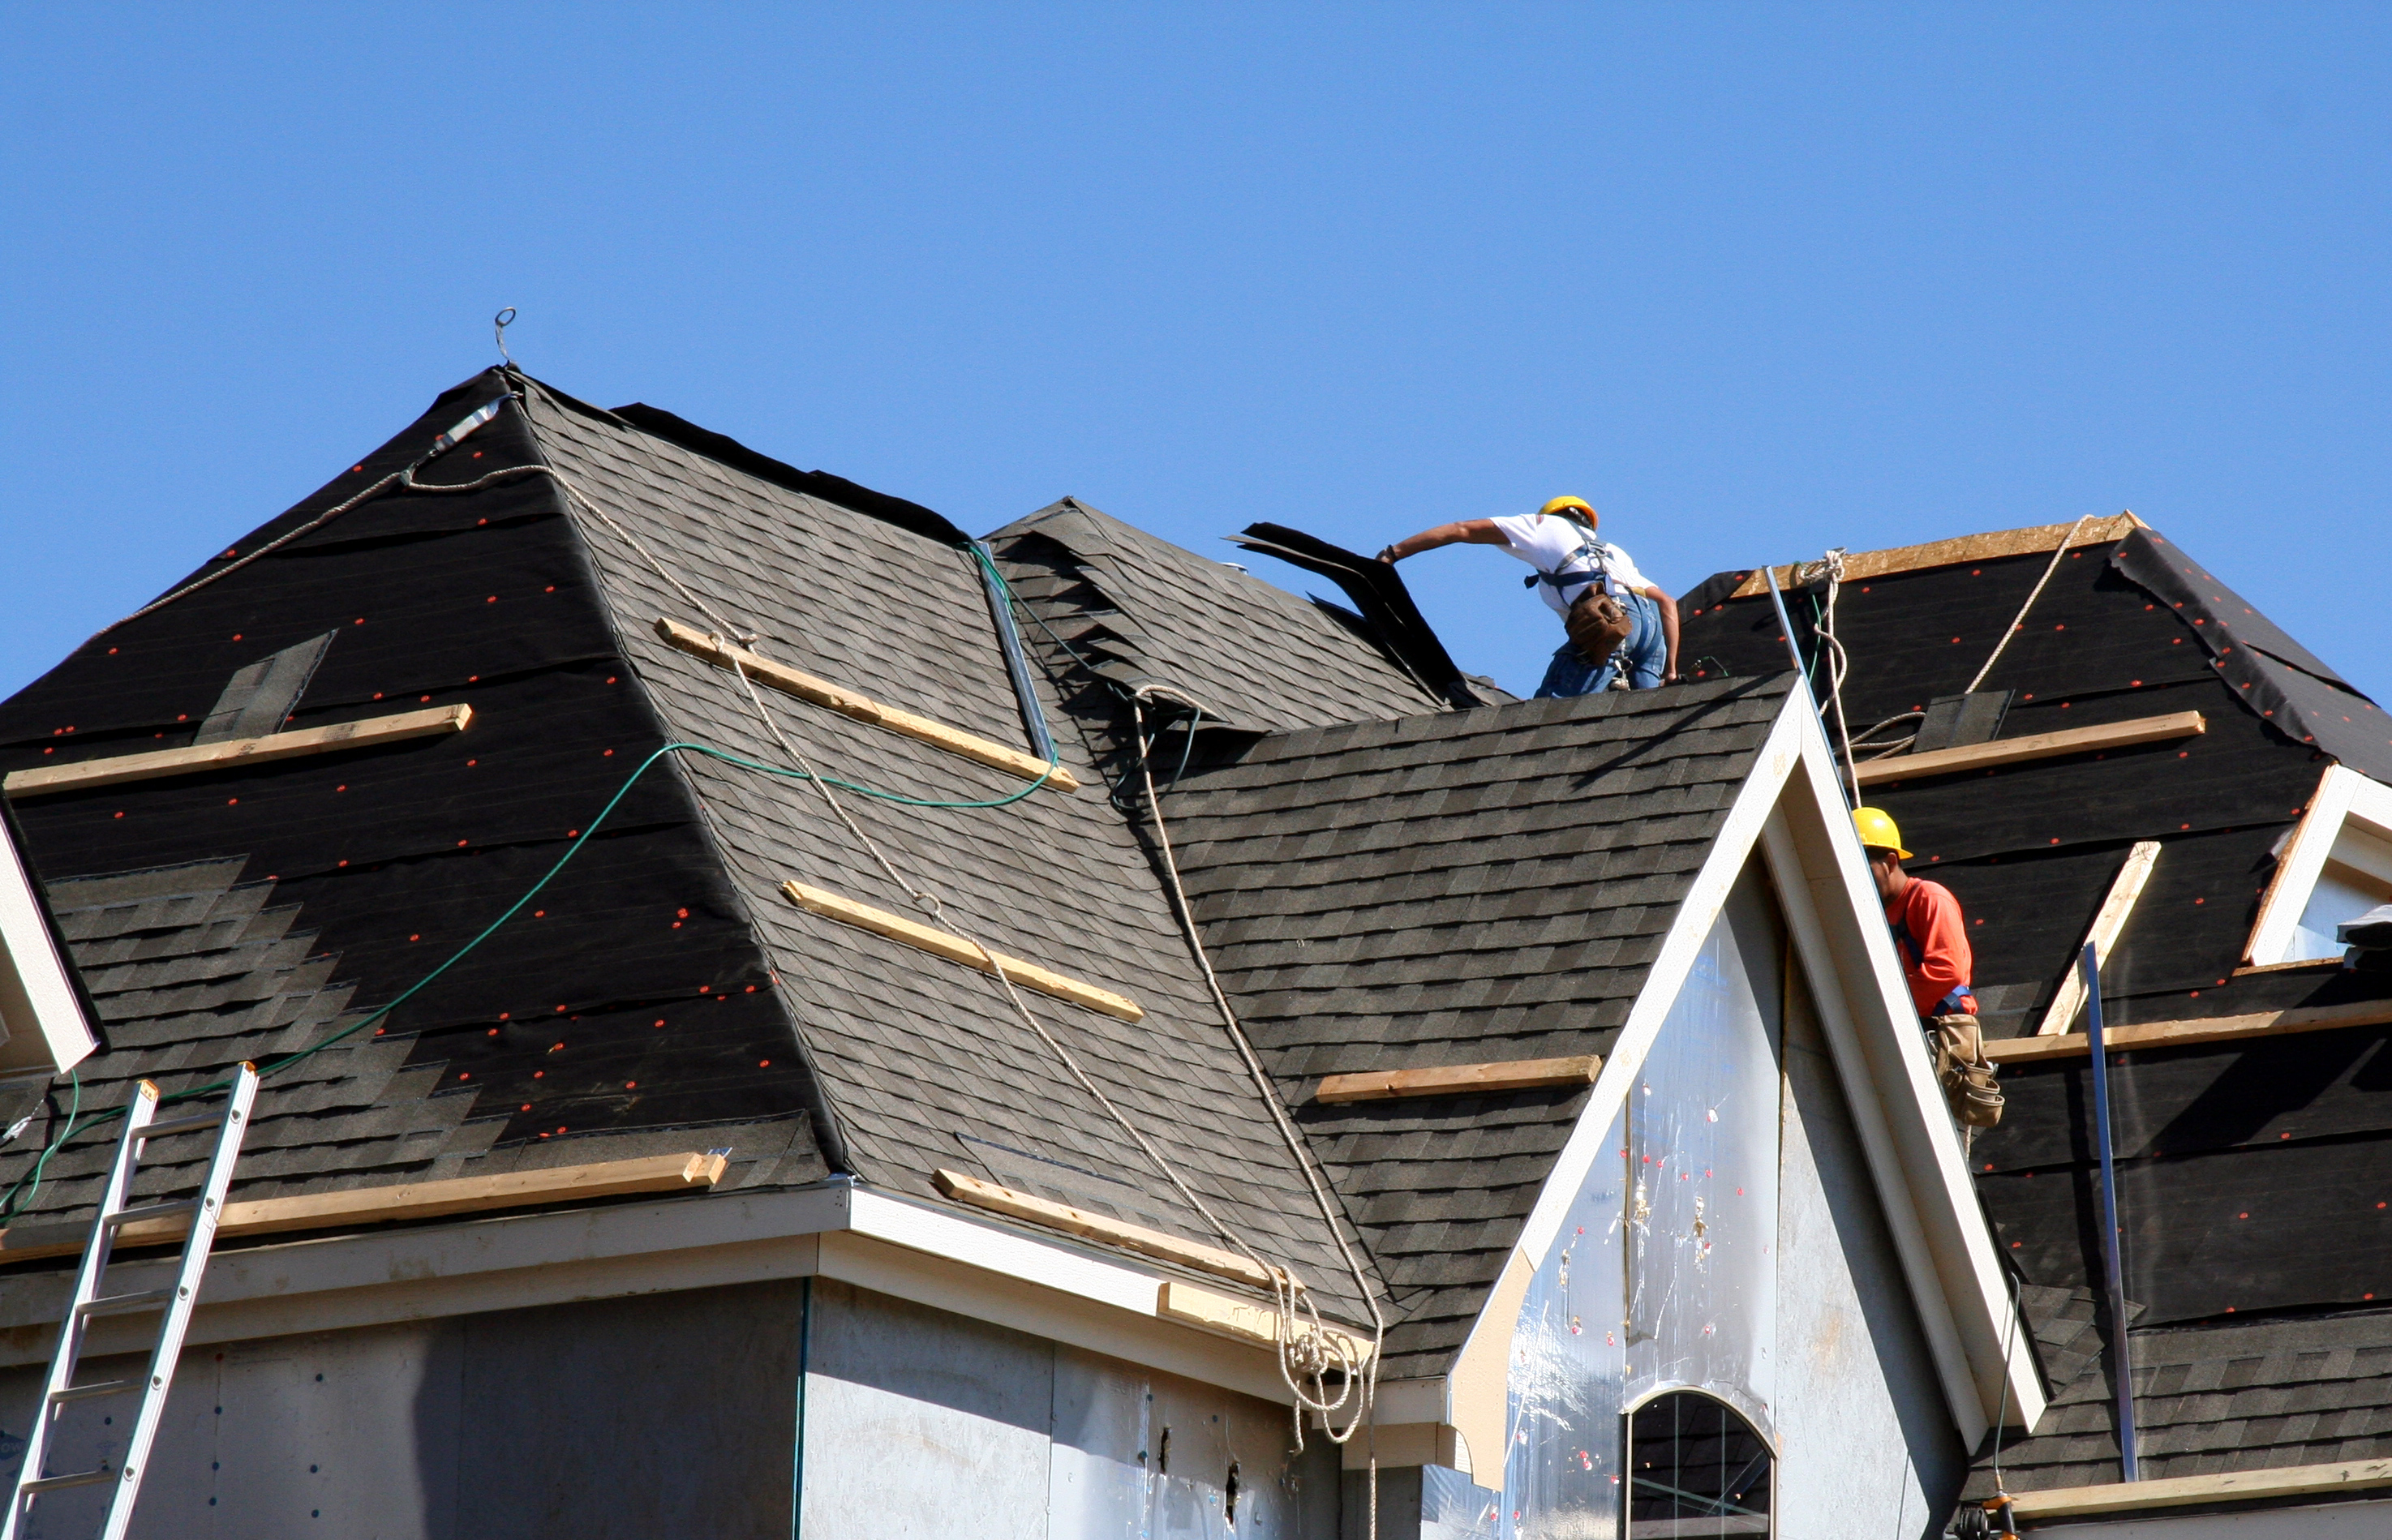 Repair Your Roof With Charleston Roofing Contractors at Titan Roofing LLC Call 843-647-3183